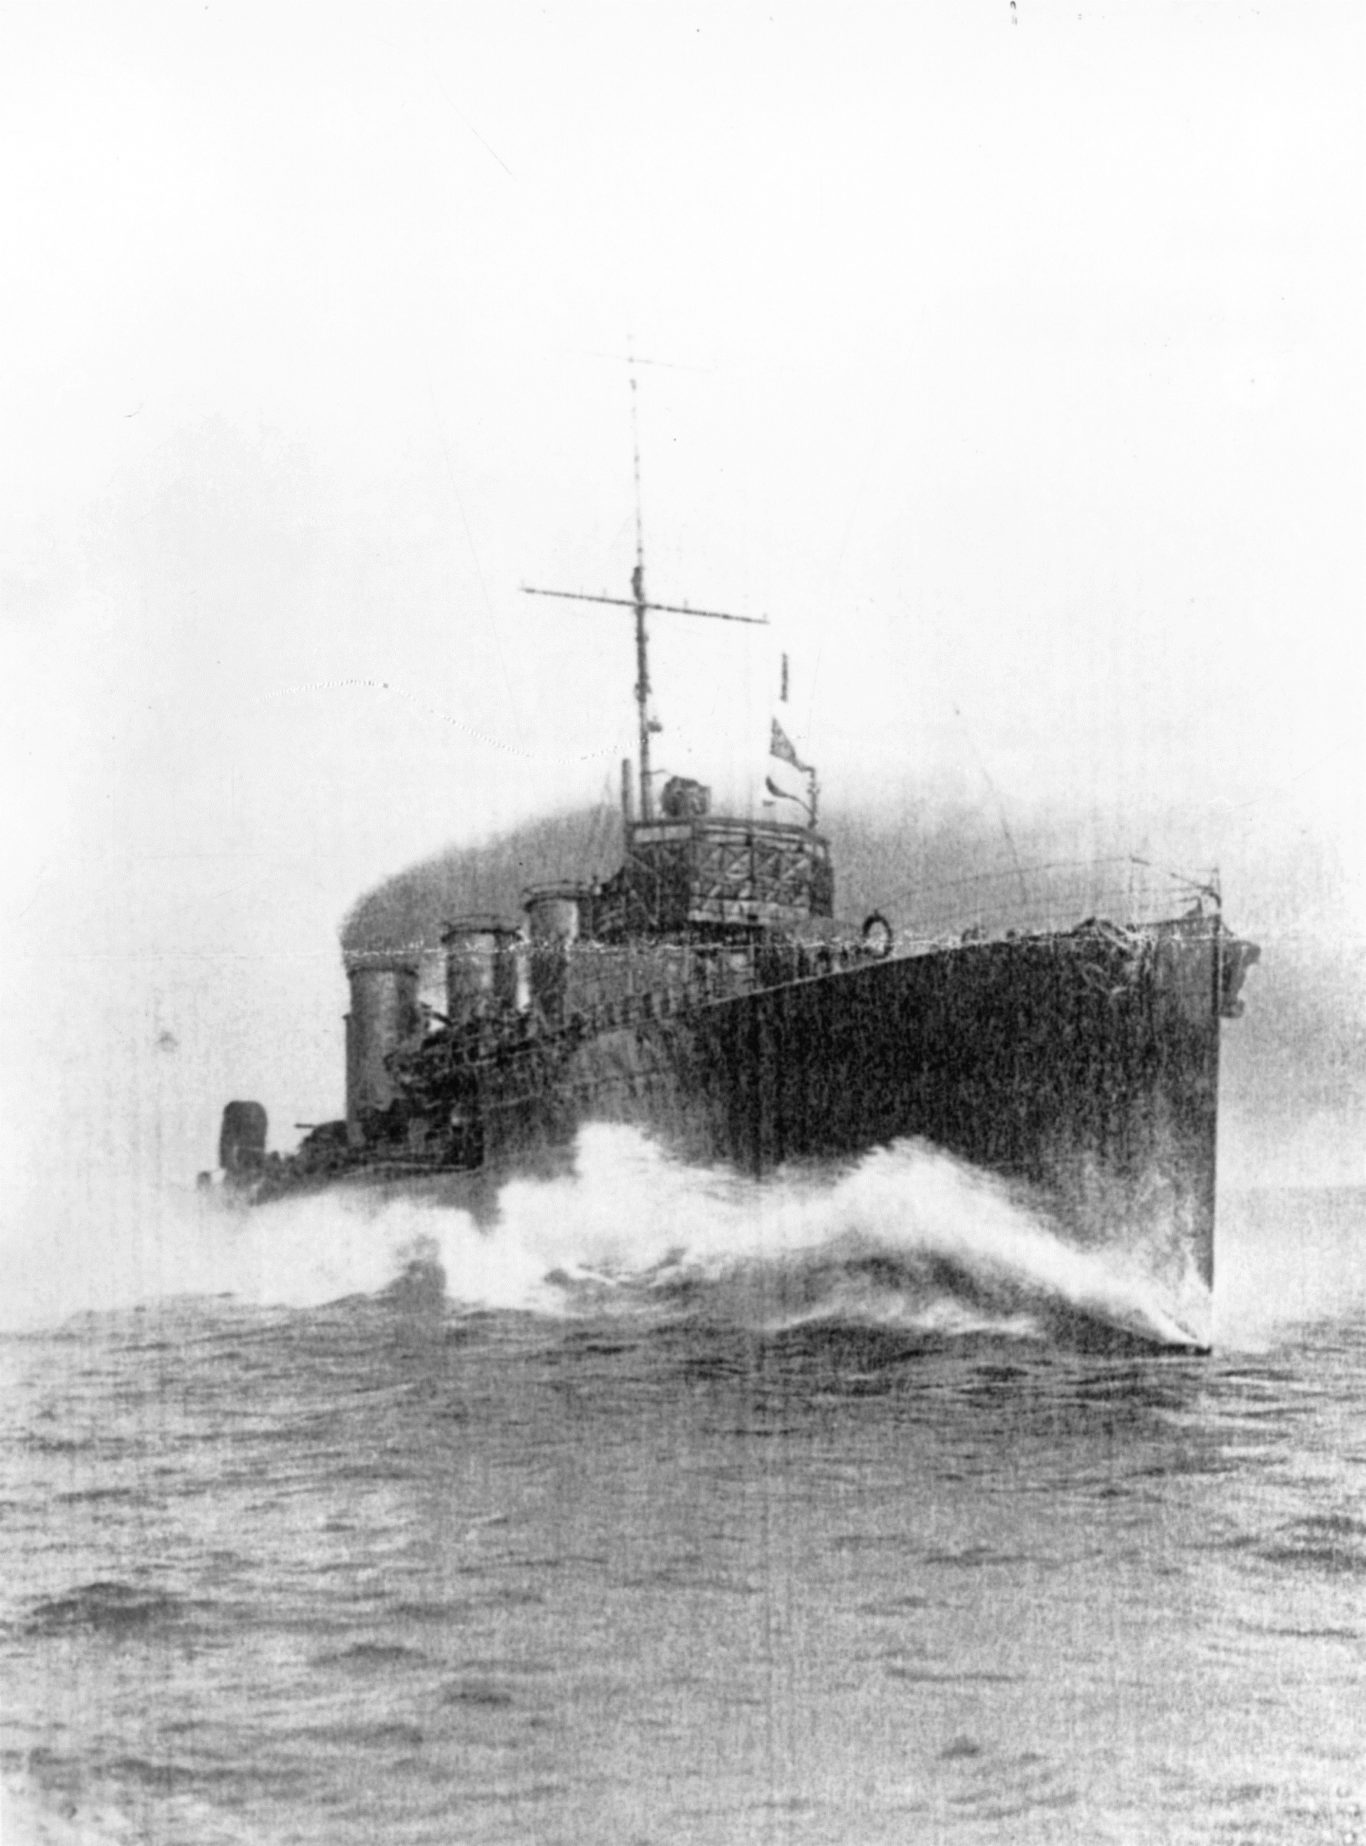 HMS Opal ran aground 100 years ago (Orkney Library and Archive / PA)